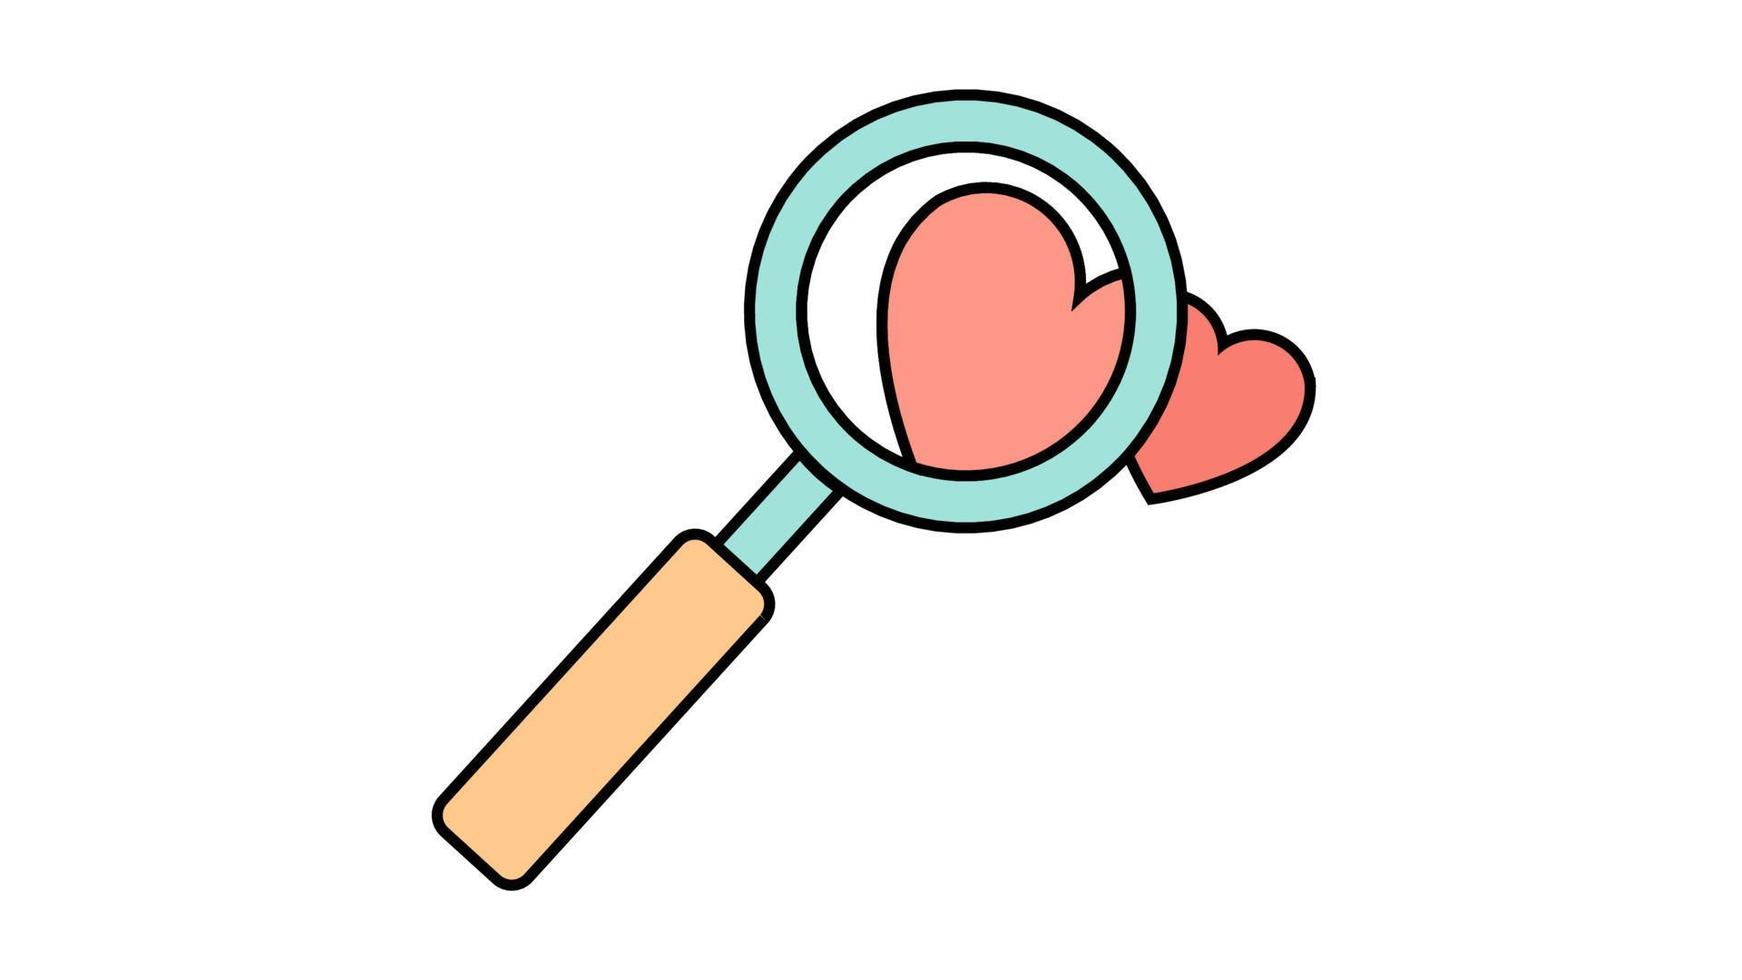 Simple flat icon of a beautiful magnifier for coming closer and hearts for the feast of love Valentine's Day or March 8th. Vector illustration